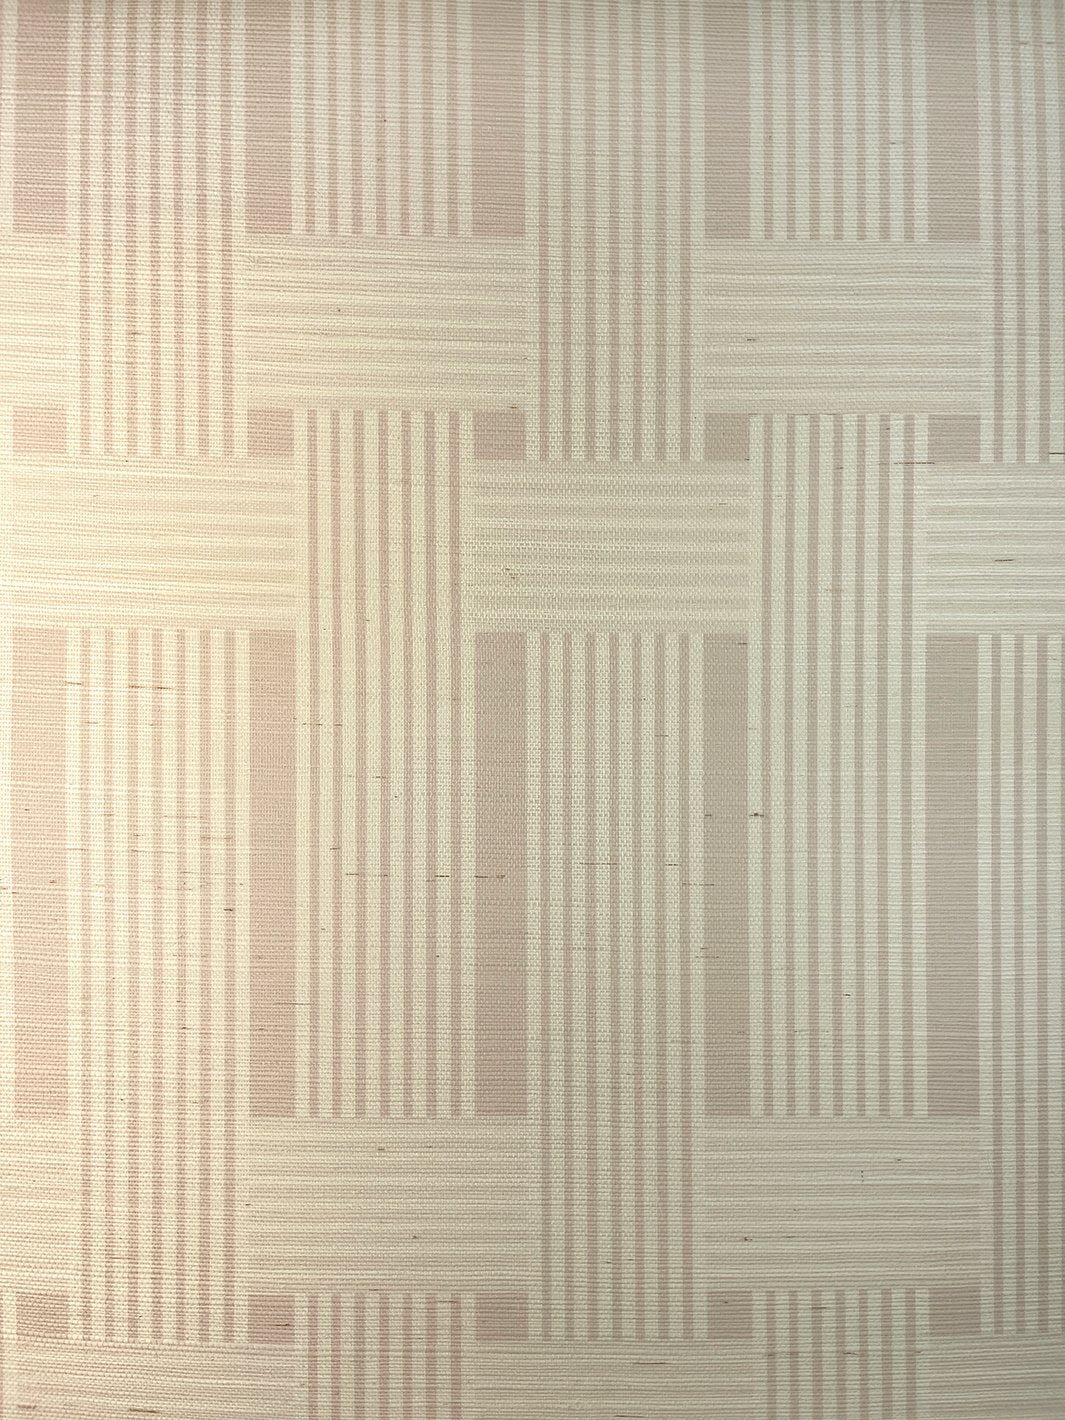 'Roman Holiday Woven' Grasscloth' Wallpaper by Barbie™ - Oyster